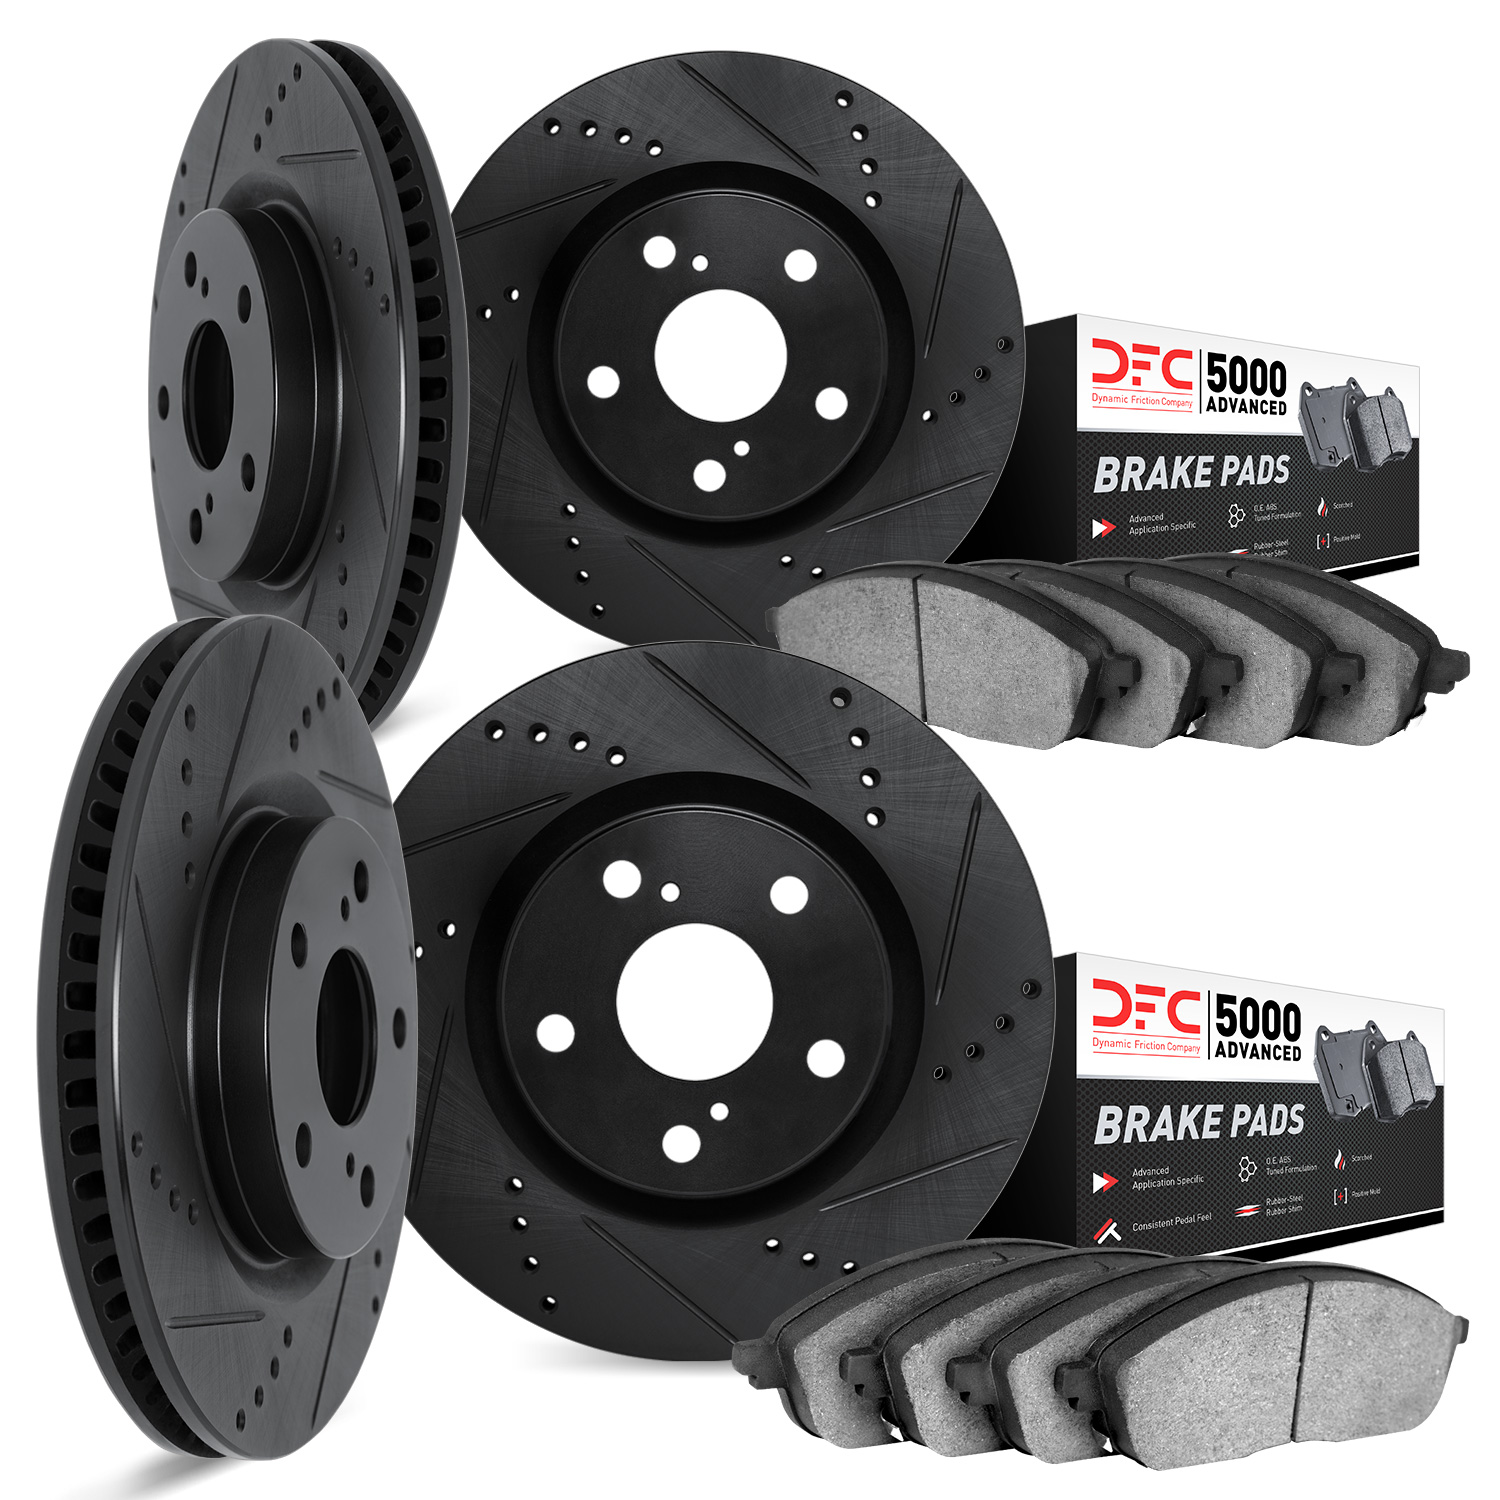 8504-31025 Drilled/Slotted Brake Rotors w/5000 Advanced Brake Pads Kit [Black], 2006-2006 BMW, Position: Front and Rear